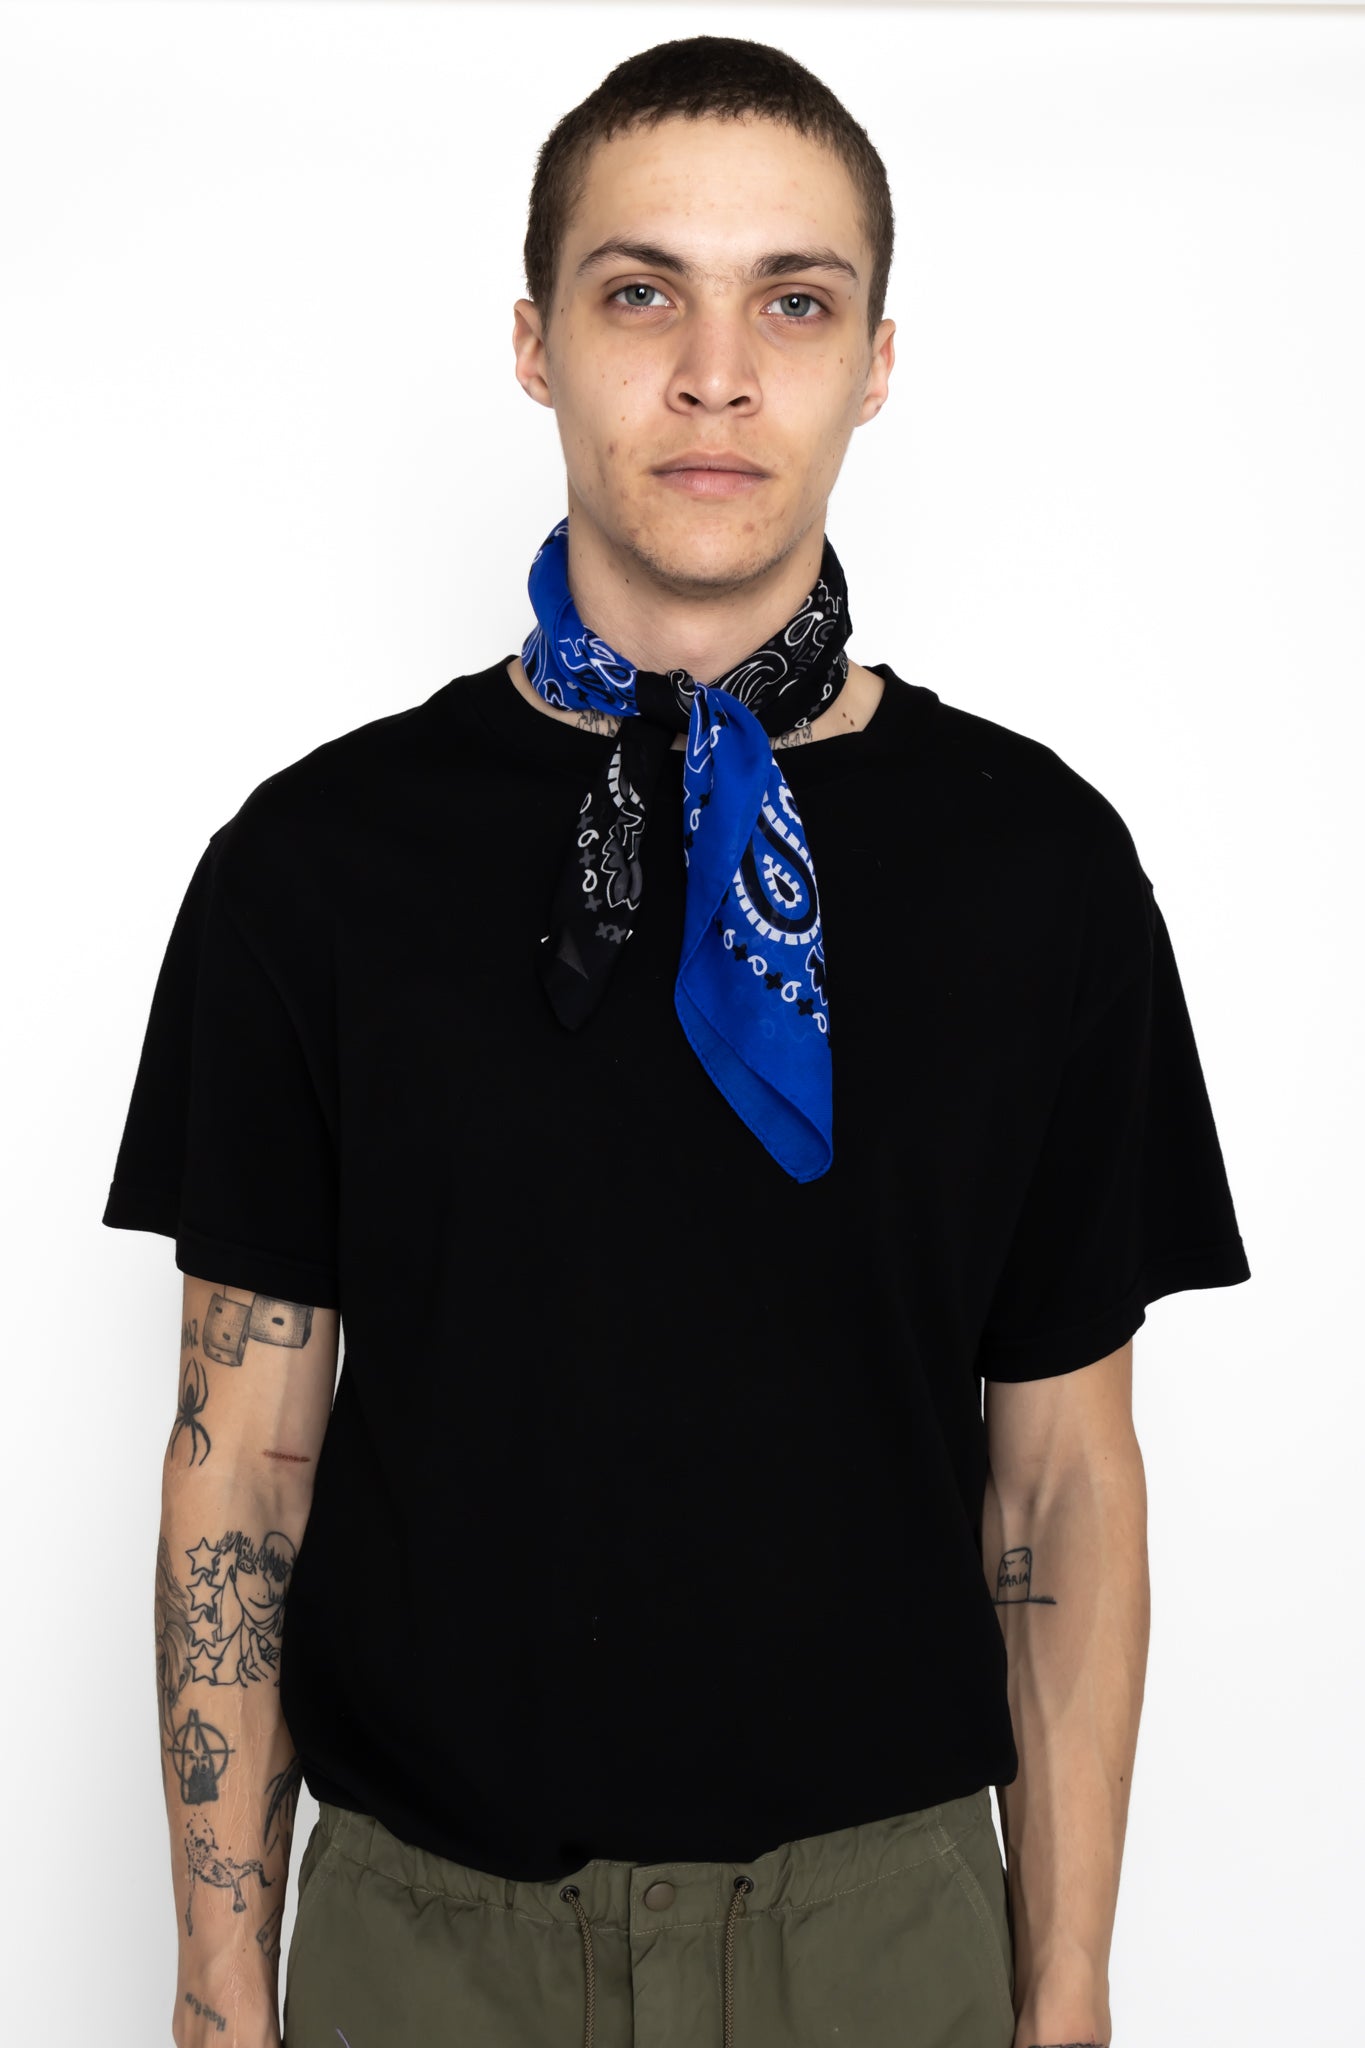 Destin Italian made Bandana. Color: Black x Blue 2 tone Extra fine cotton Light and soft touch 100% cotton Made in Italy Size: 23.5" x 23.5". Use as multipurpose scarf or bandana wrap. Unisex.